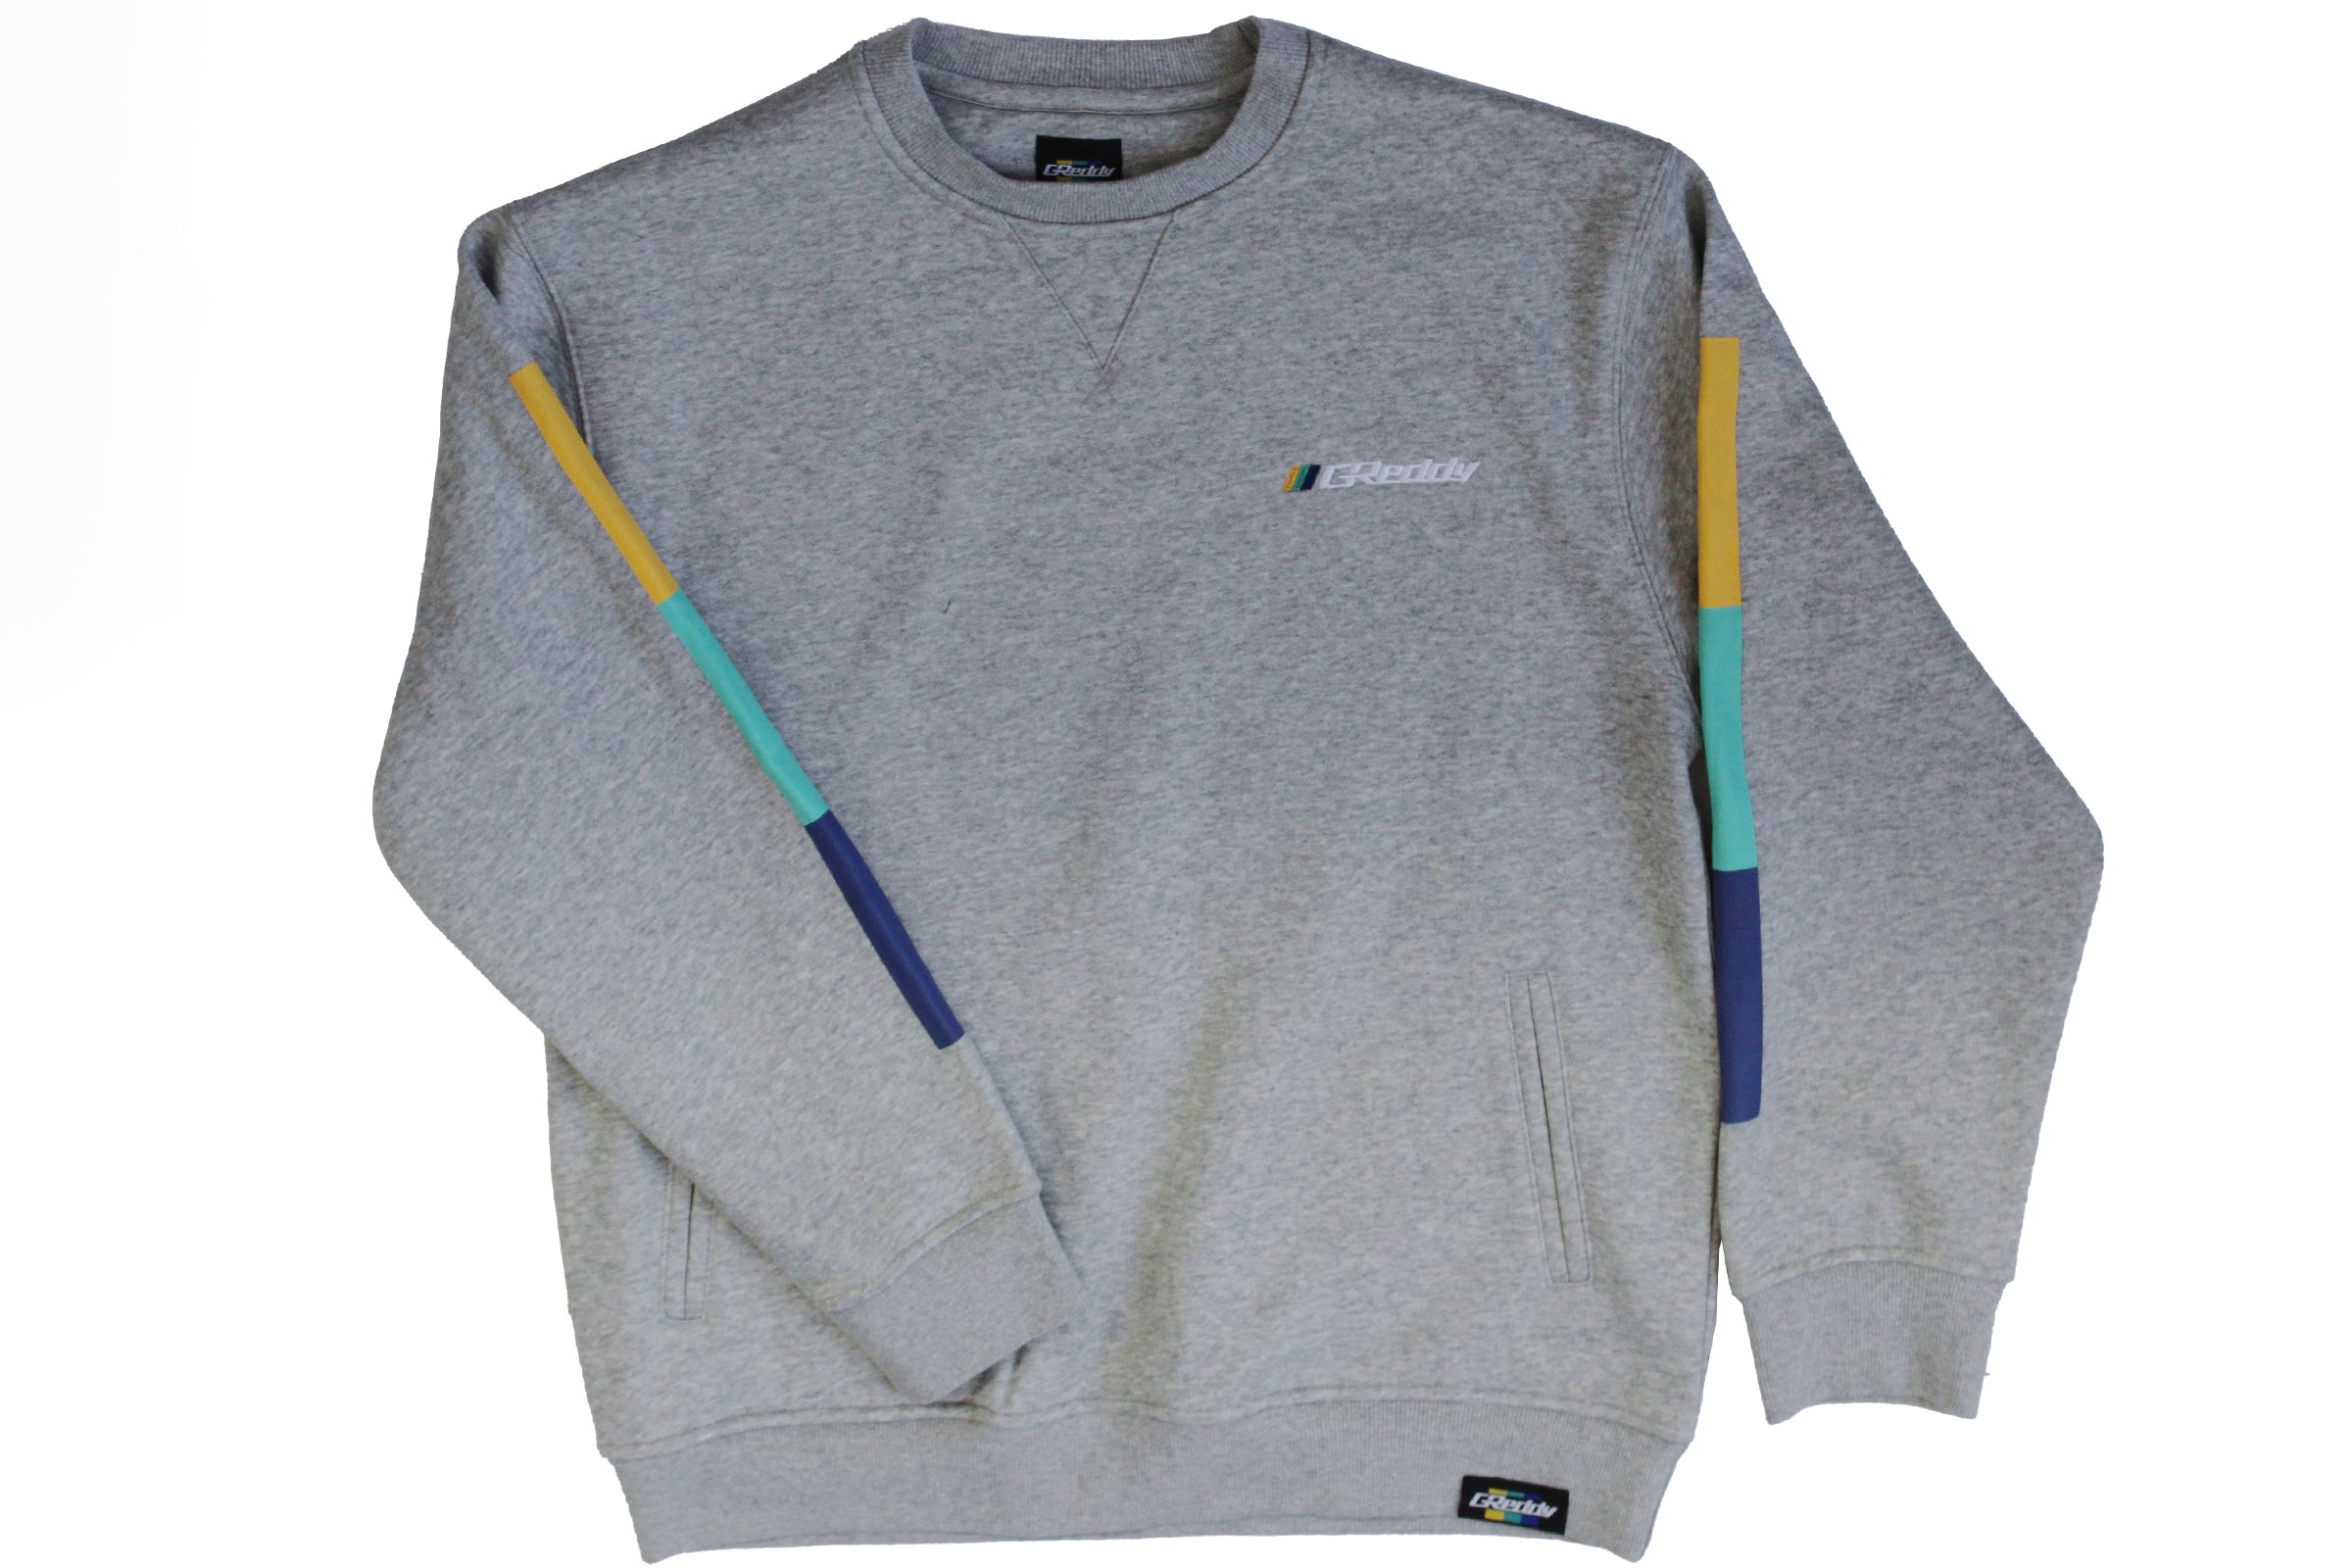 GReddy Embroidered Fleece, with Pockets and Sleeve stripes - Heather Grey